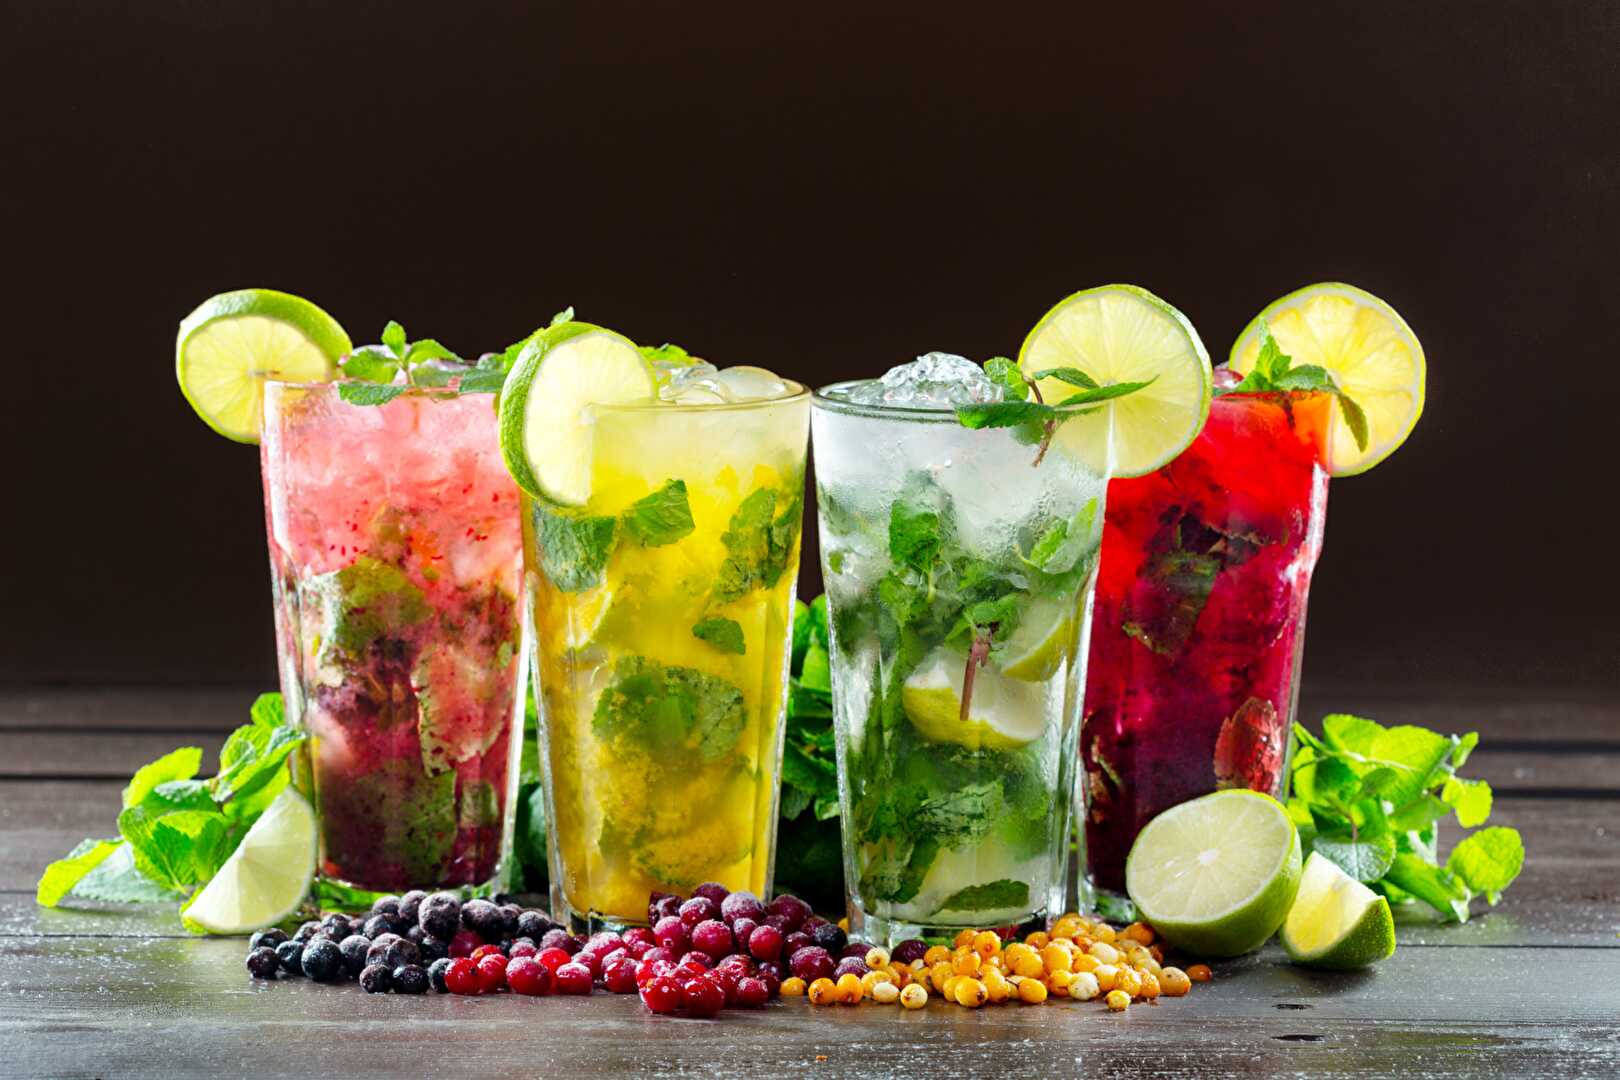 Rediscover Summer with These Delicious Non-Alcoholic Cocktail Flavors